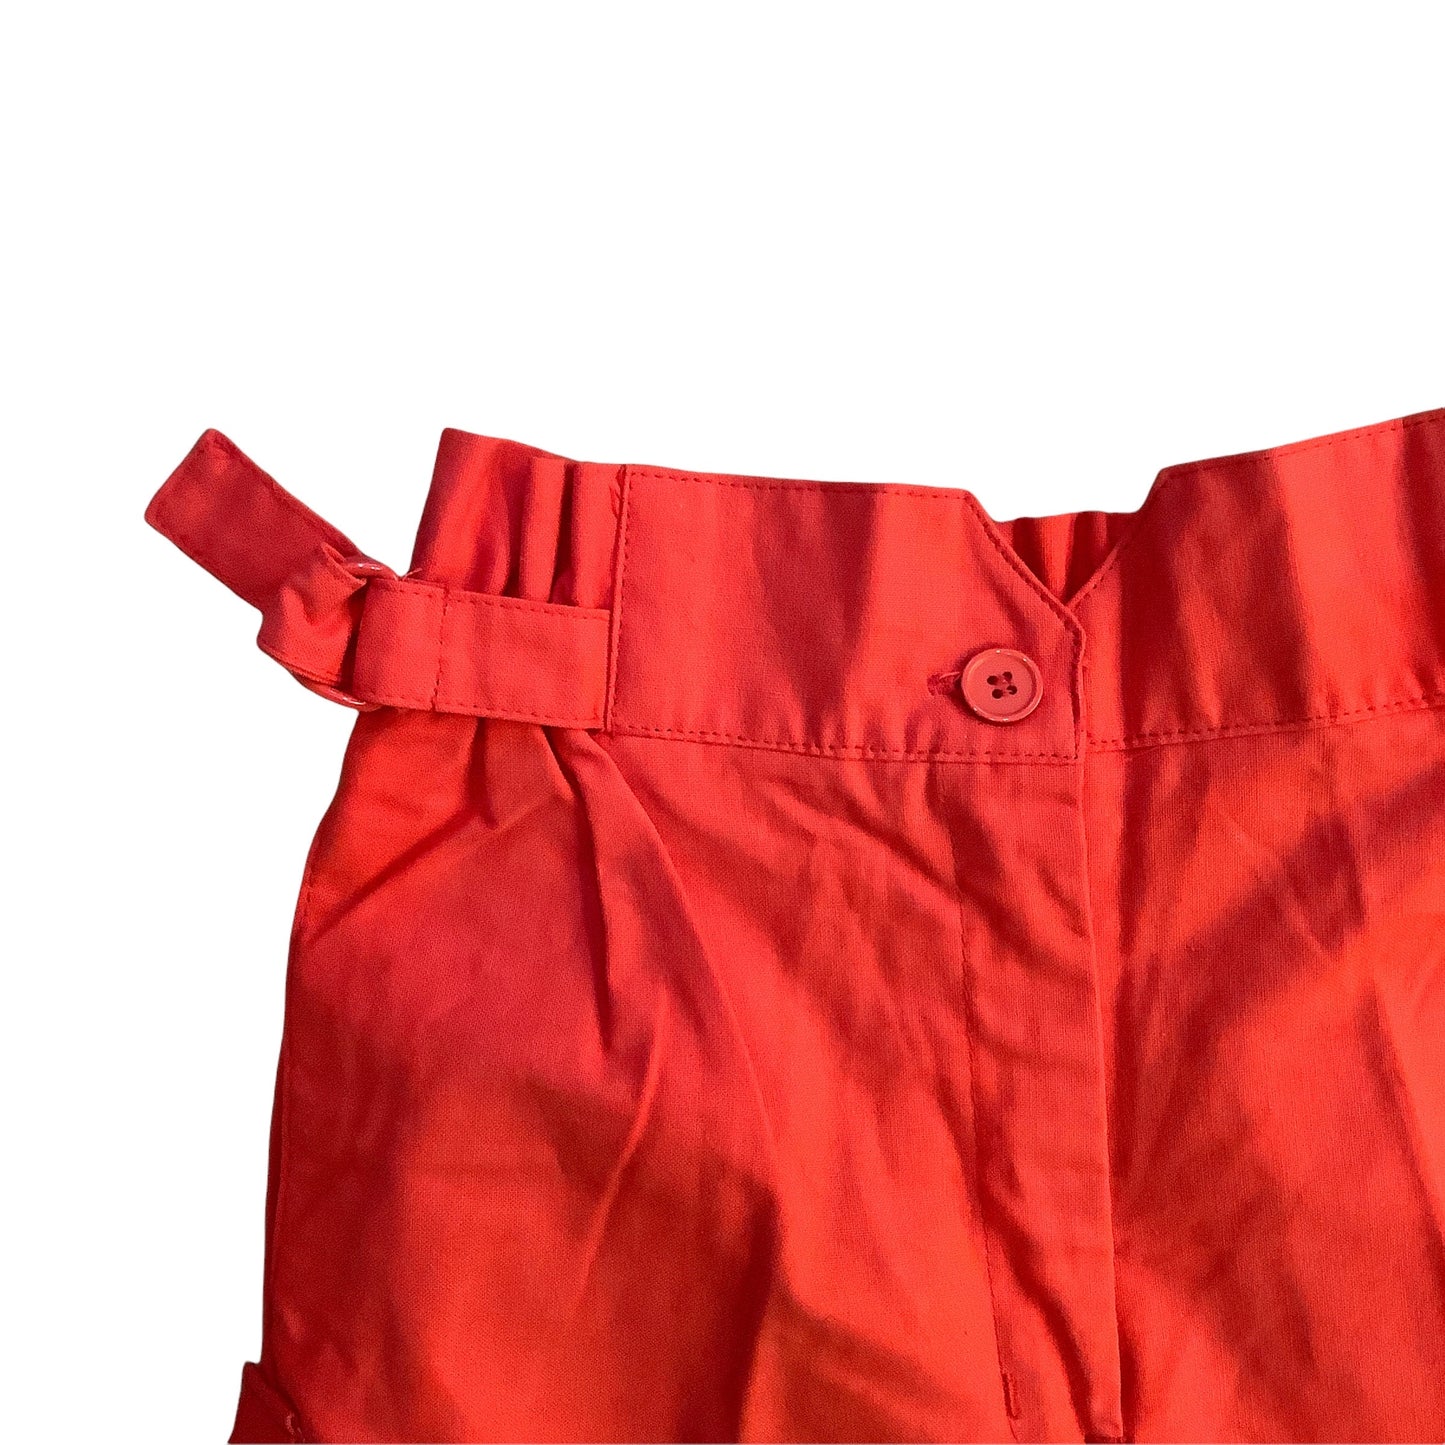 Vintage 1970's Red Shorts 6-8Y